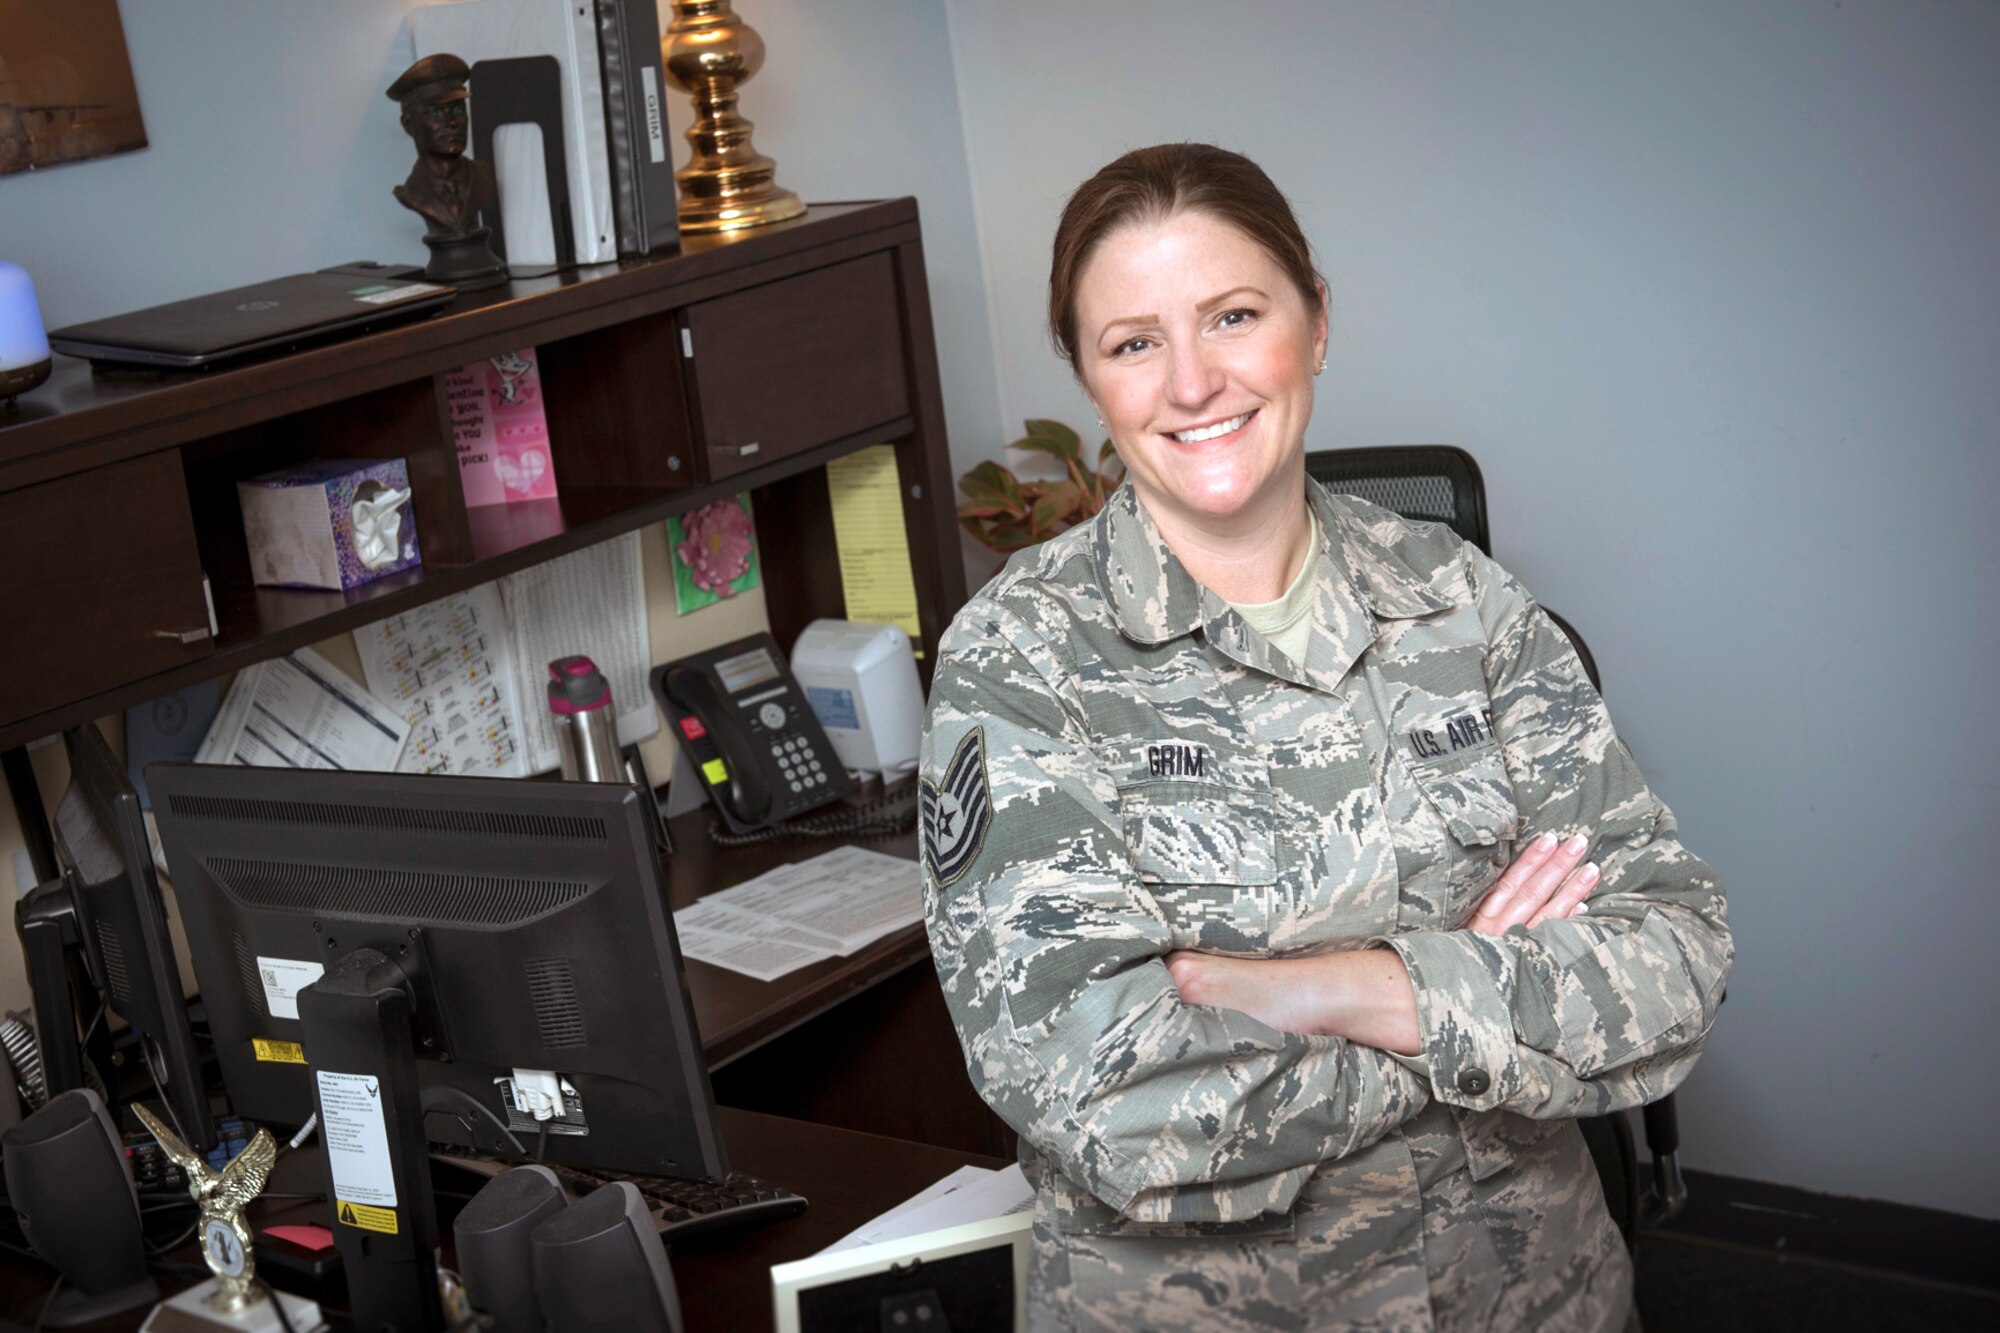 Tech. Sgt. Christina Grim, a budget analyst for the 167th Comptroller Flight, was selected as the 167th Airlift Wing’s Airman Spotlight for April. (U.S. Air National Guard photo by Senior Master Sgt. Emily Beightol-Deyerle)